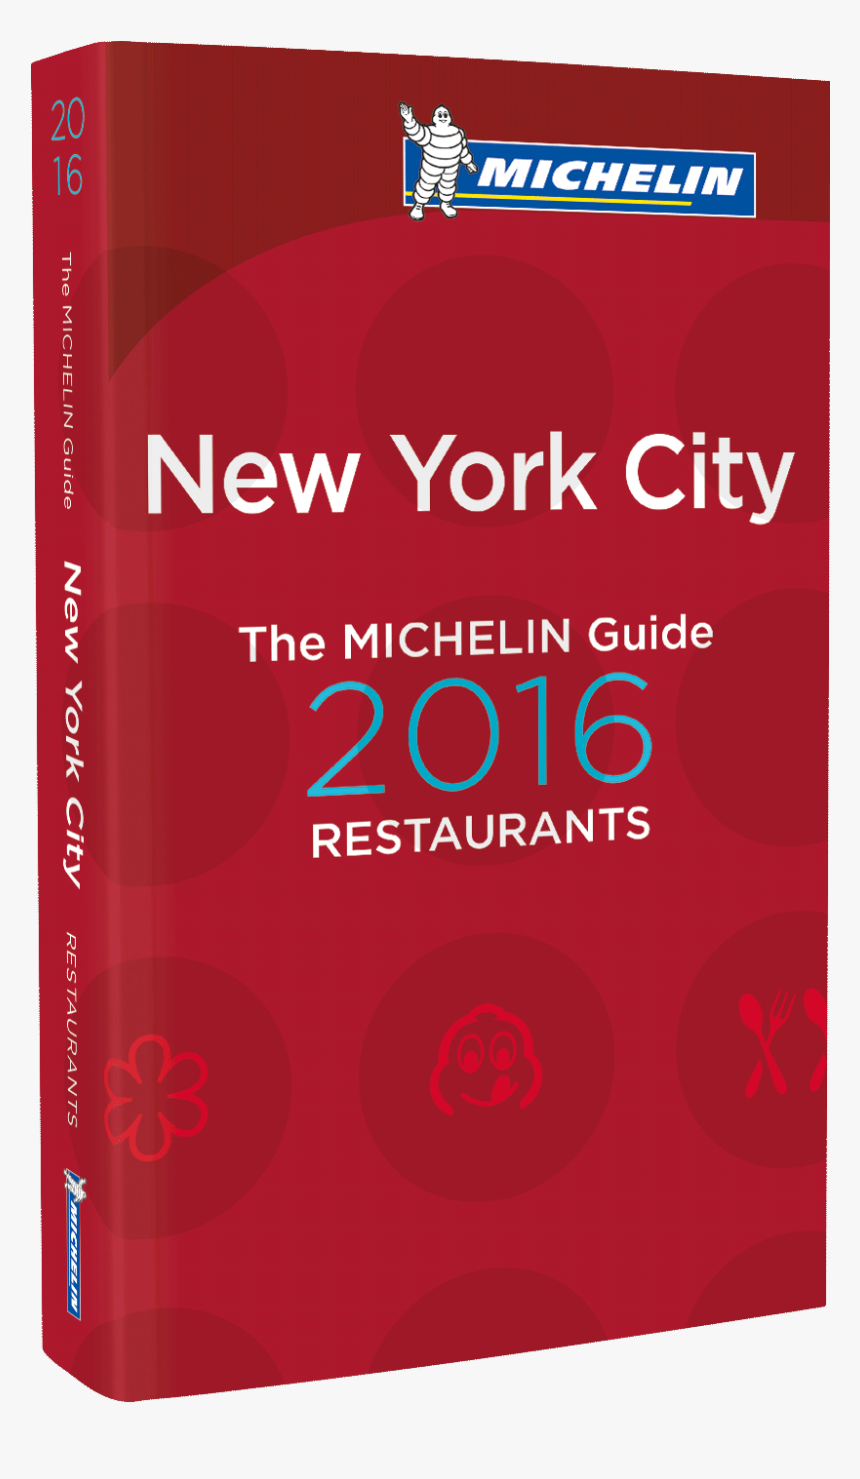 Gm Ny 2016 - Nyc's Michelin Guide, HD Png Download, Free Download